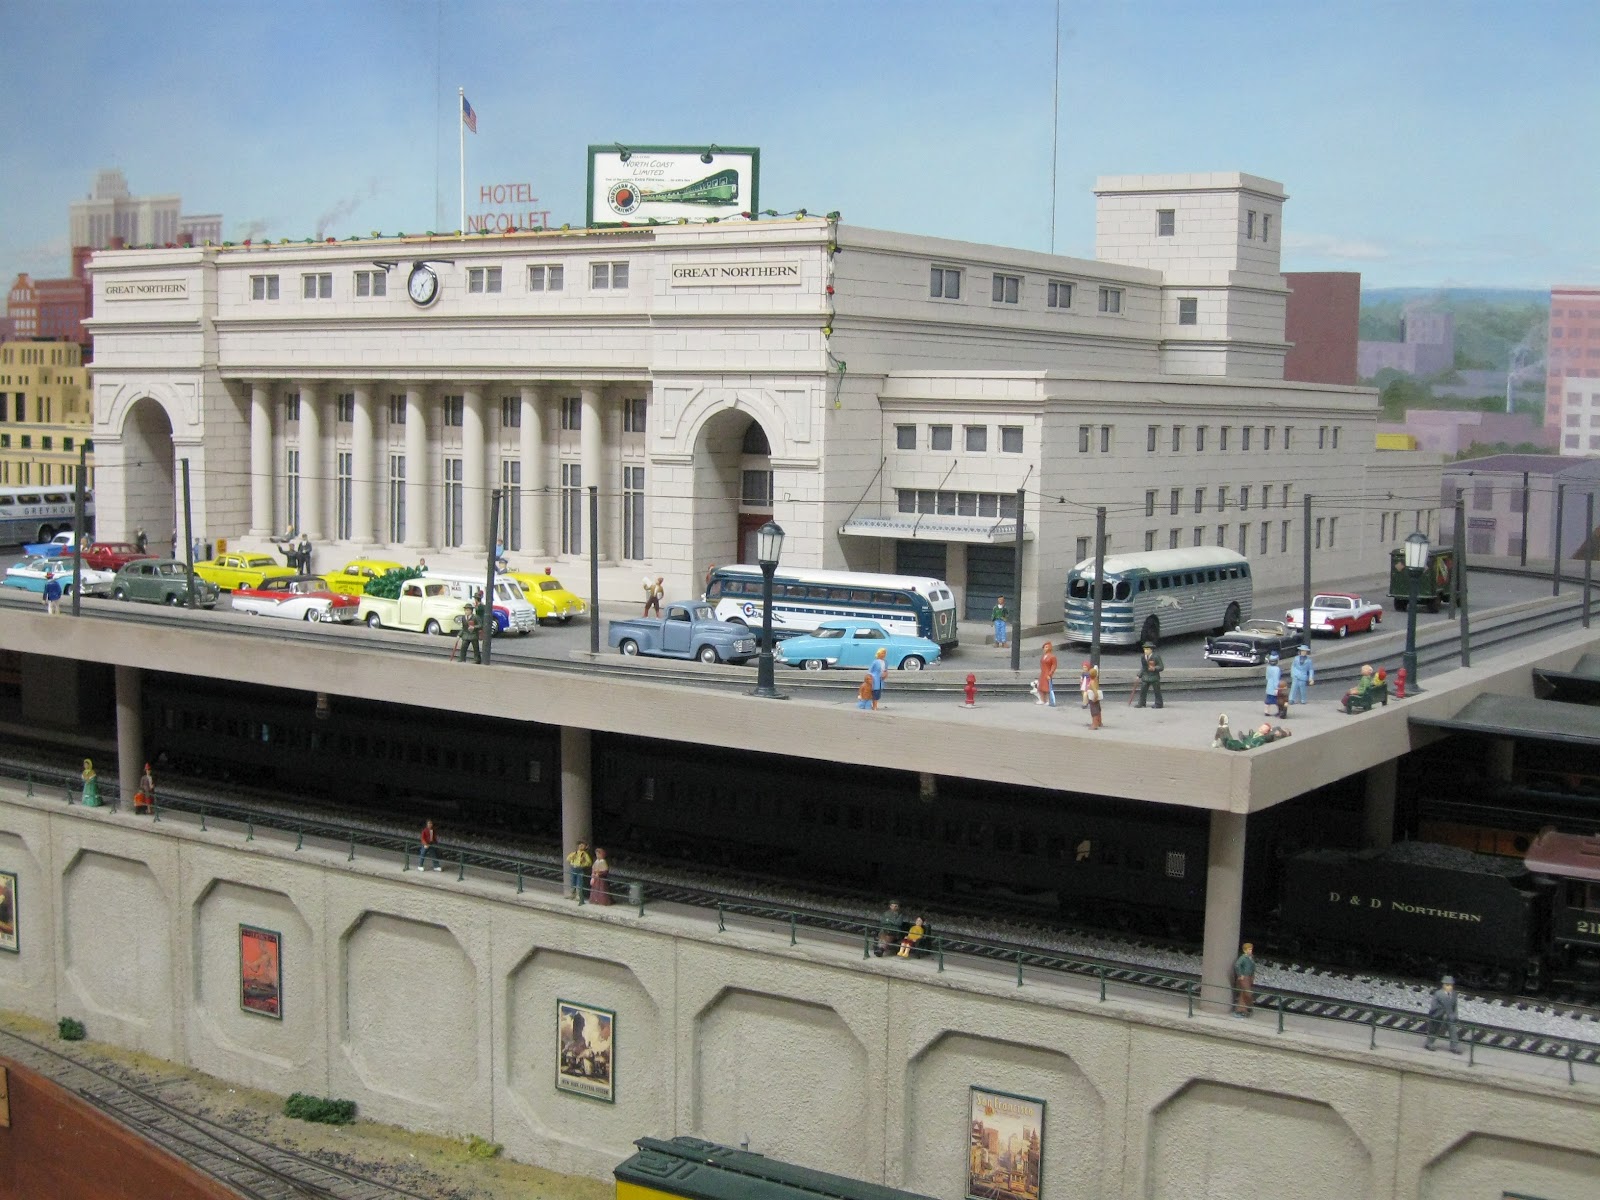  Video of the Twin City Model Railroad Museum: A Great O Scale Layout